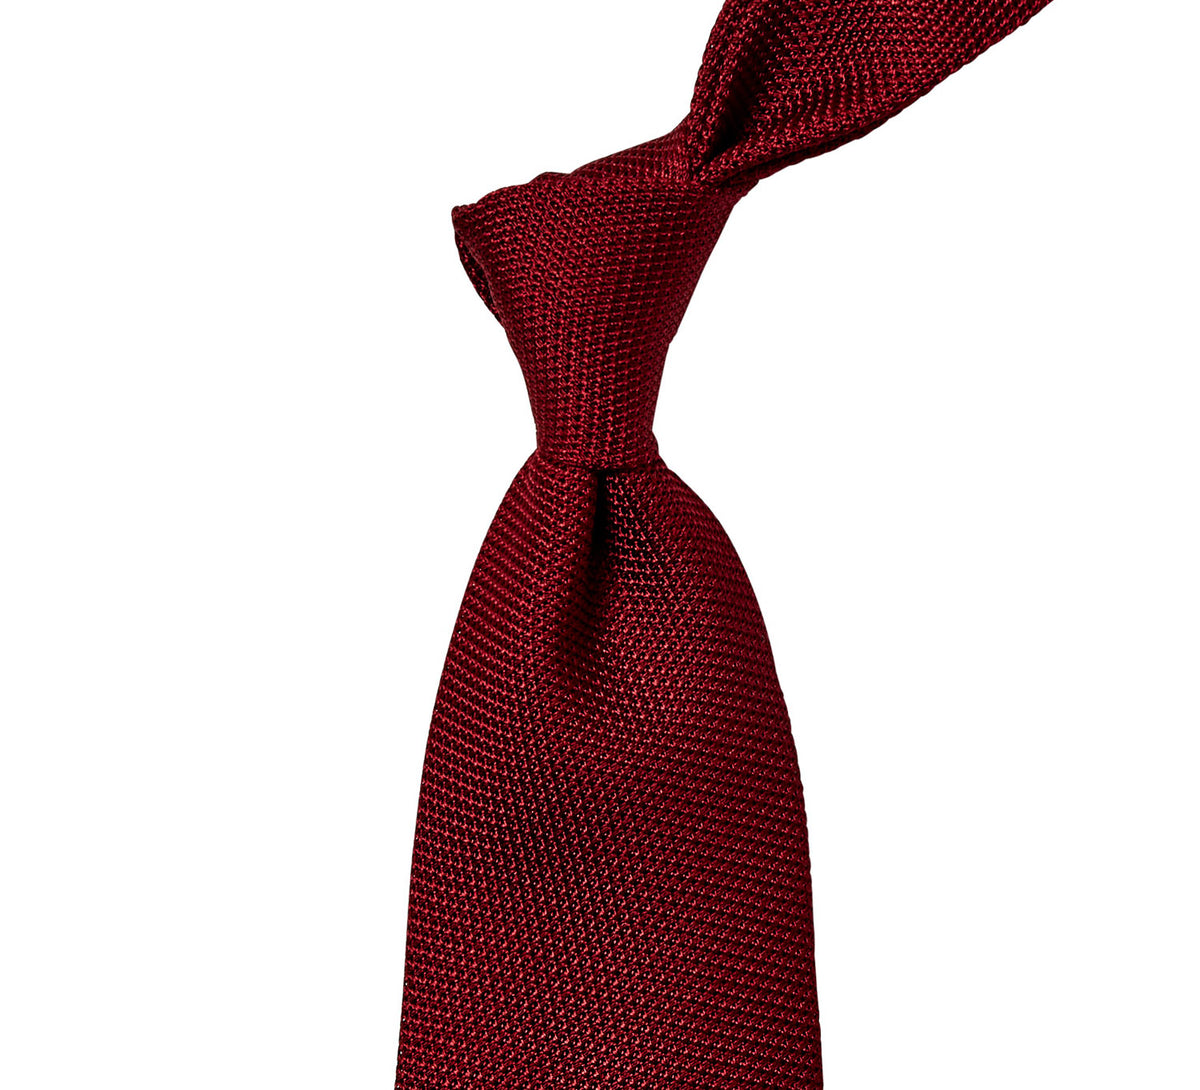 A Sovereign Grade Grenadine Fina Ruby Tie on a white background from KirbyAllison.com.